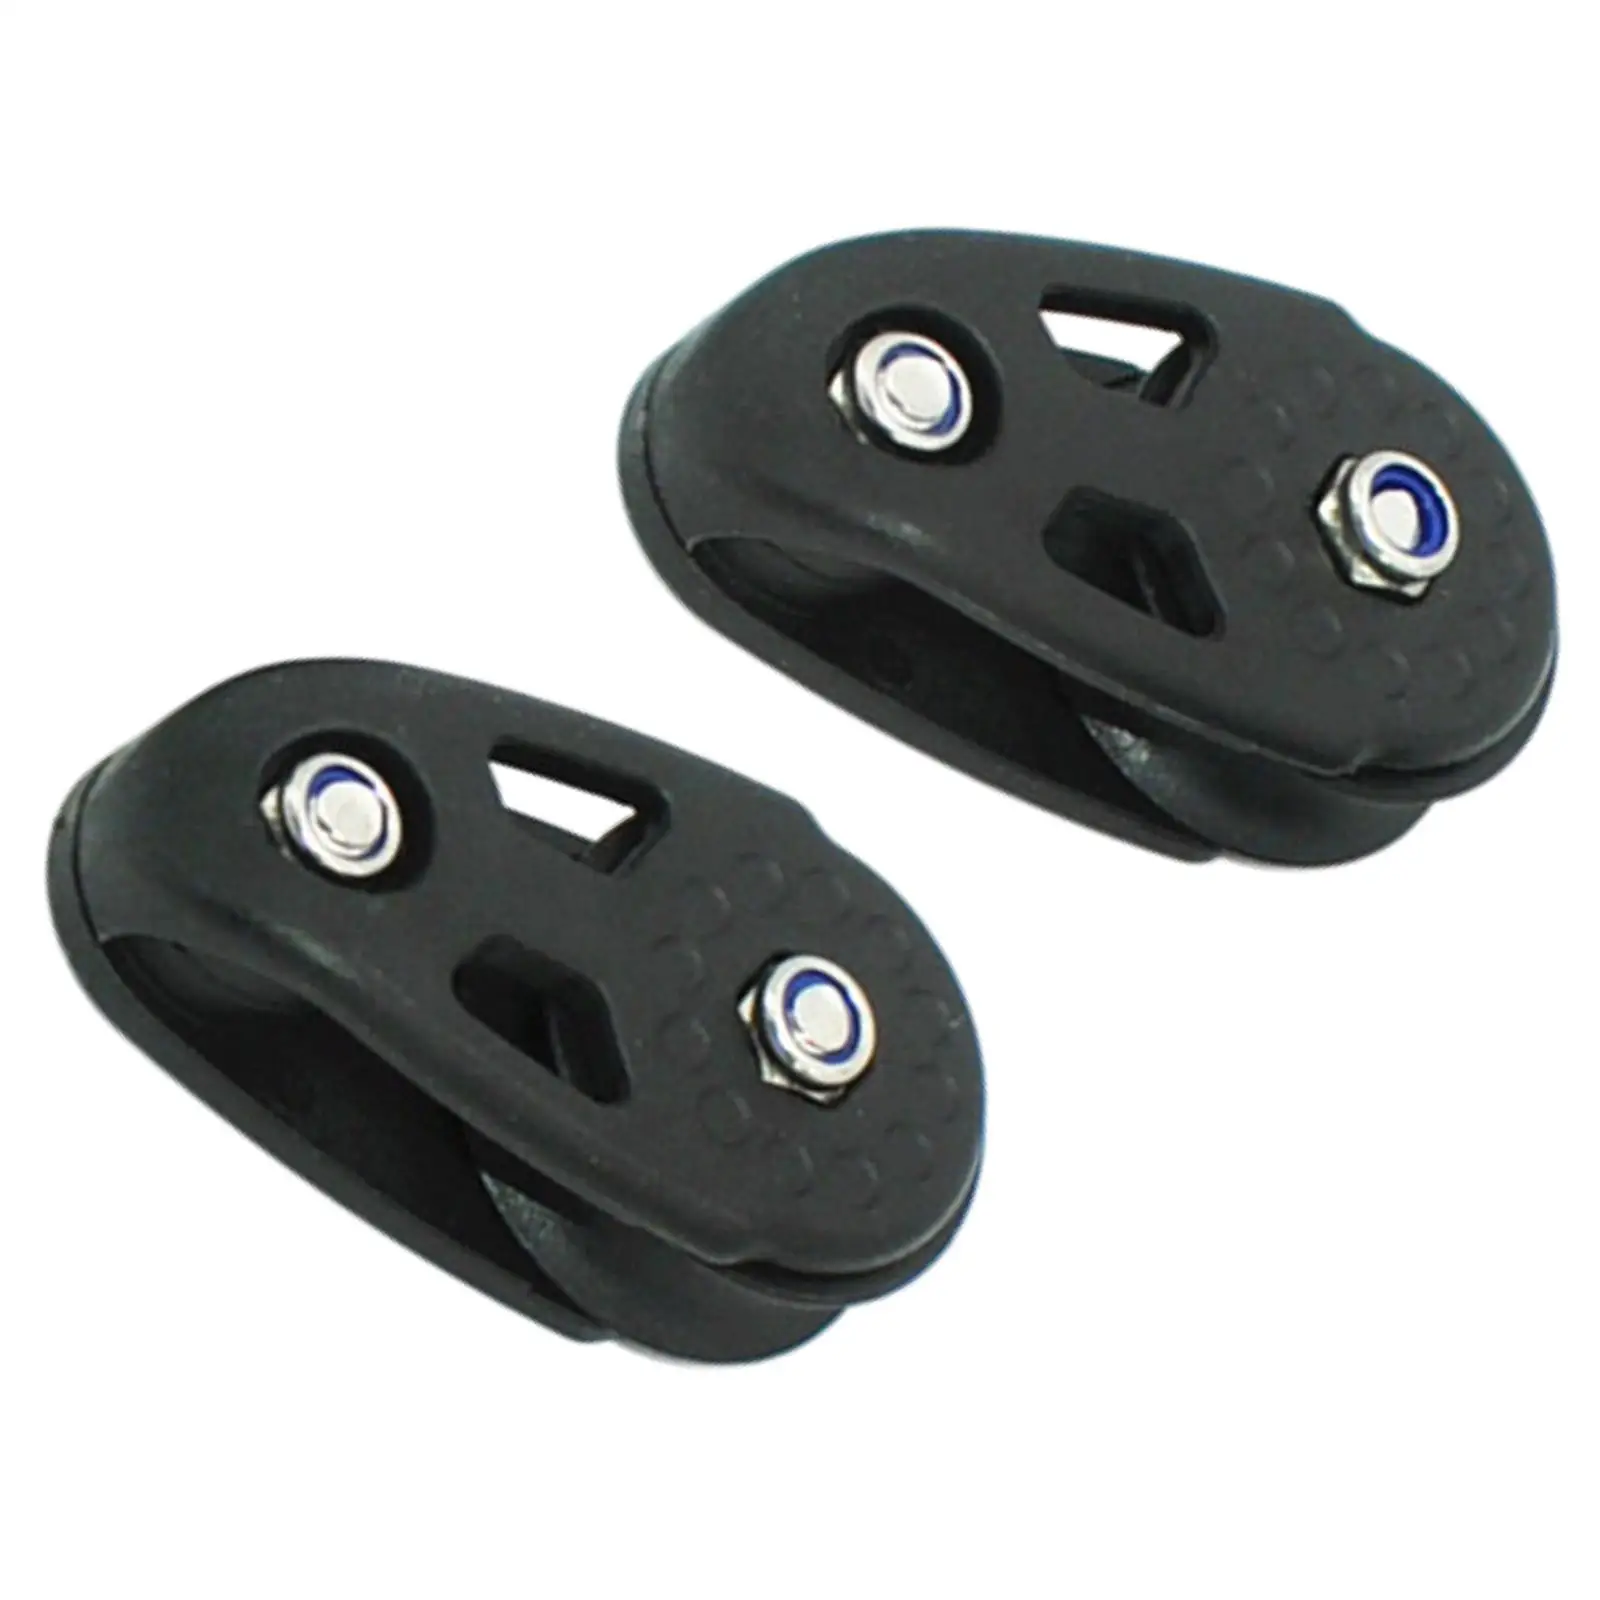 2 Pieces Kayak Pulley, Replaces 9mm  Diameter Easy to Install Accessories Pulley Blocks Slide  ,Fit for Boats Canoe